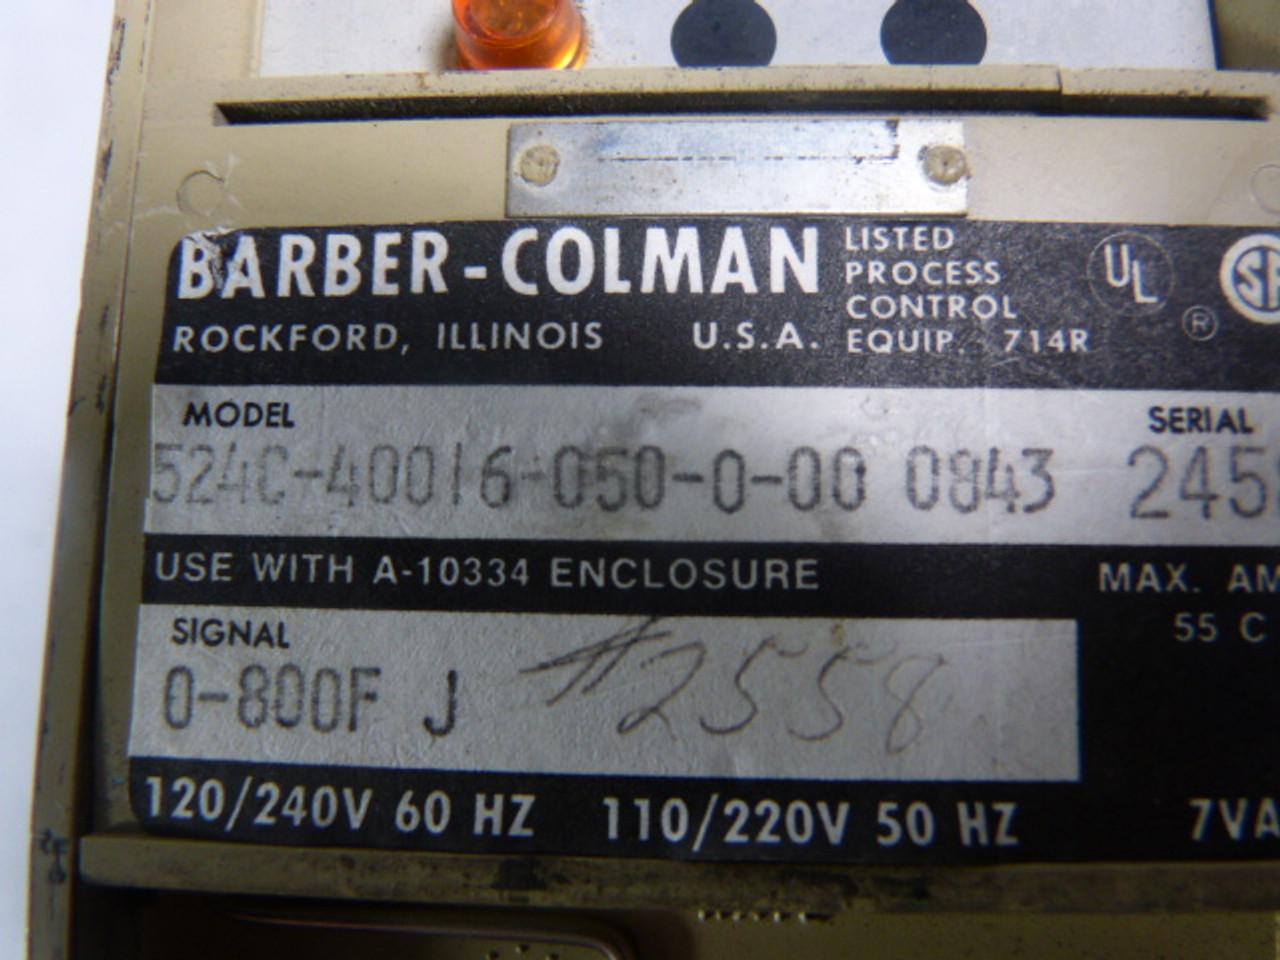 Barber Colman 524C-40016-050-0-00 Solid State Controller No Cover ! AS IS !